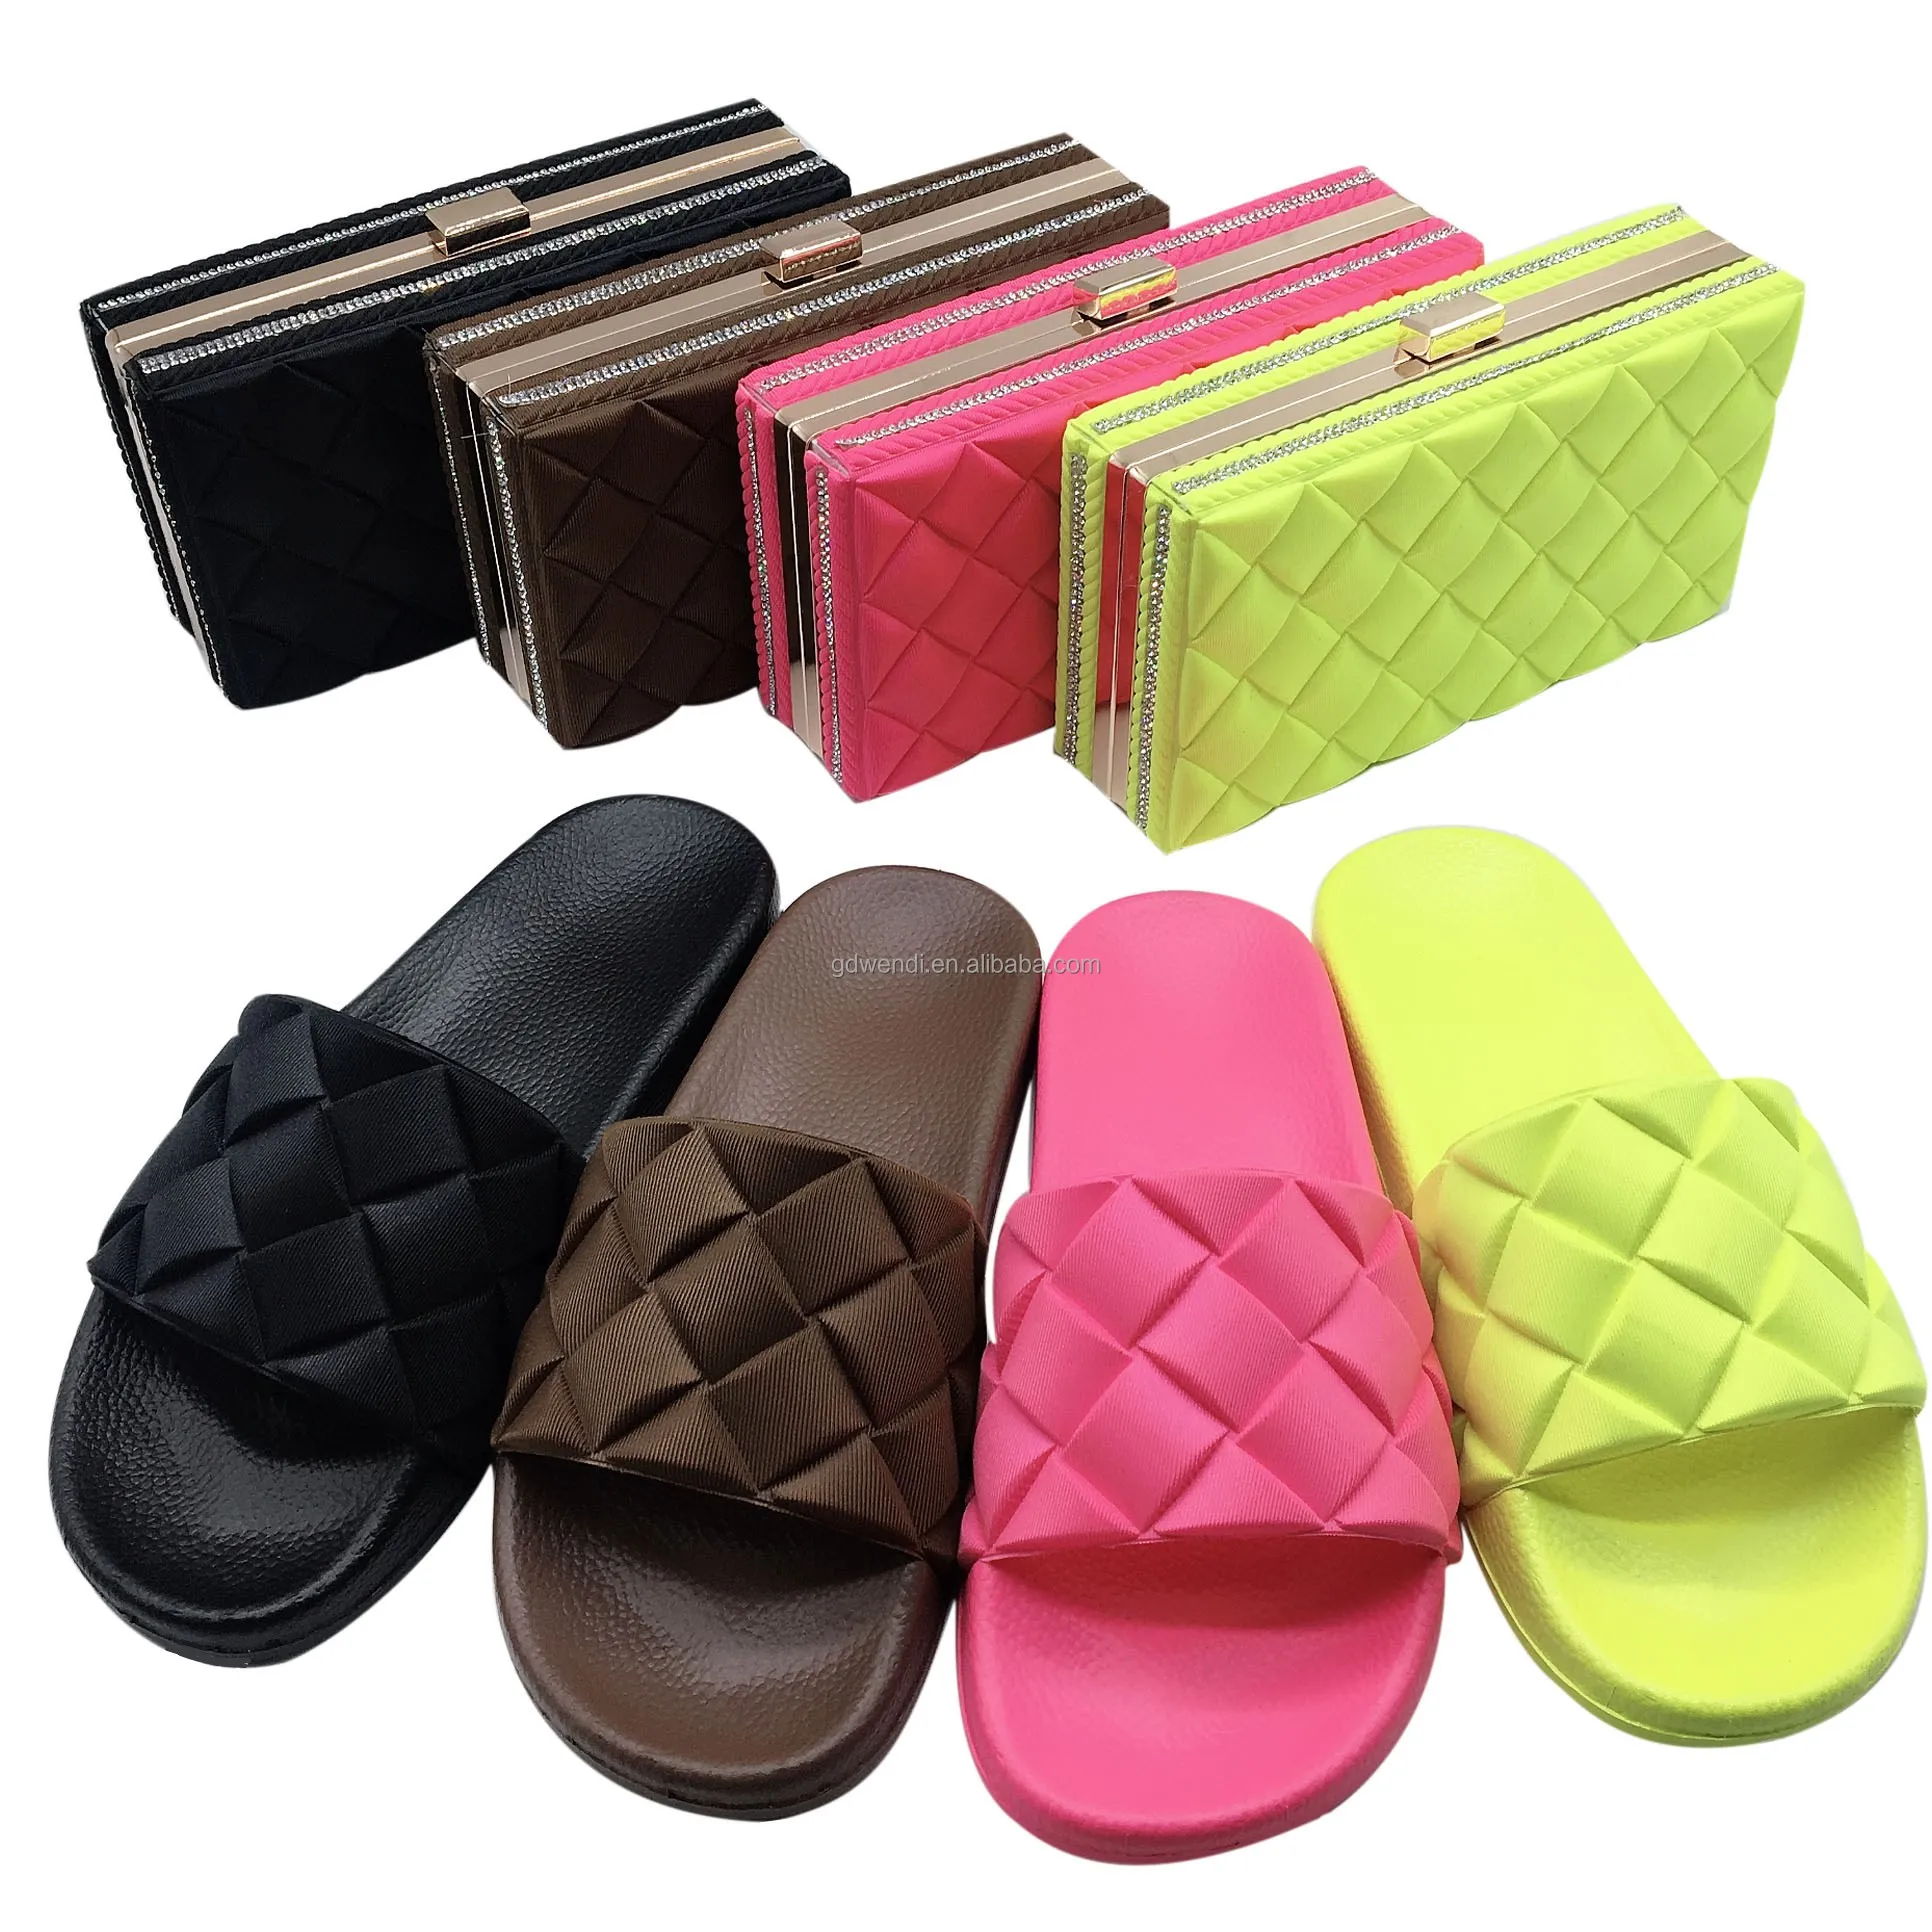 

Fashion slides slippers 2021shoes matching bag sets for ladies women house shoes slide sandals